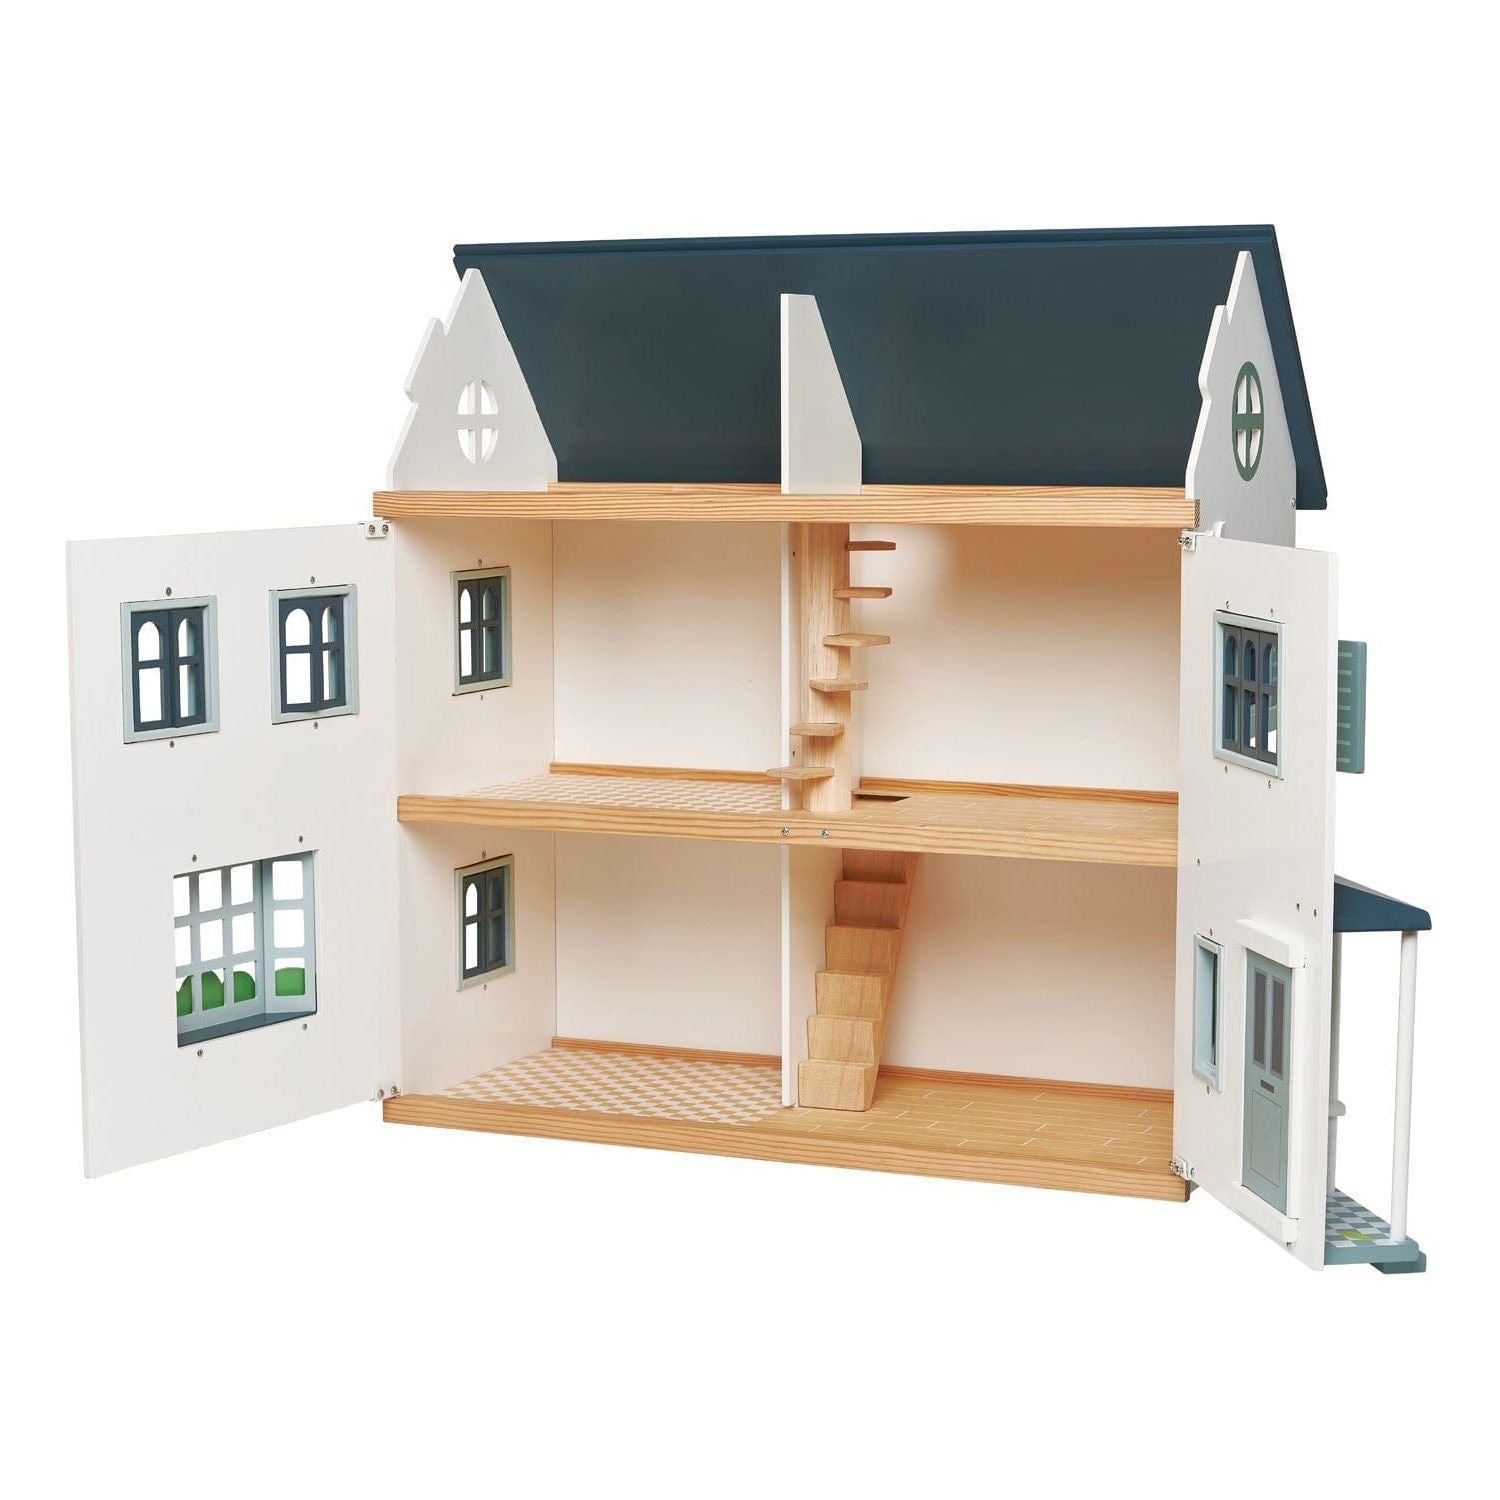 Dovetail House - The Online Toy Shop - Dollhouse - 2